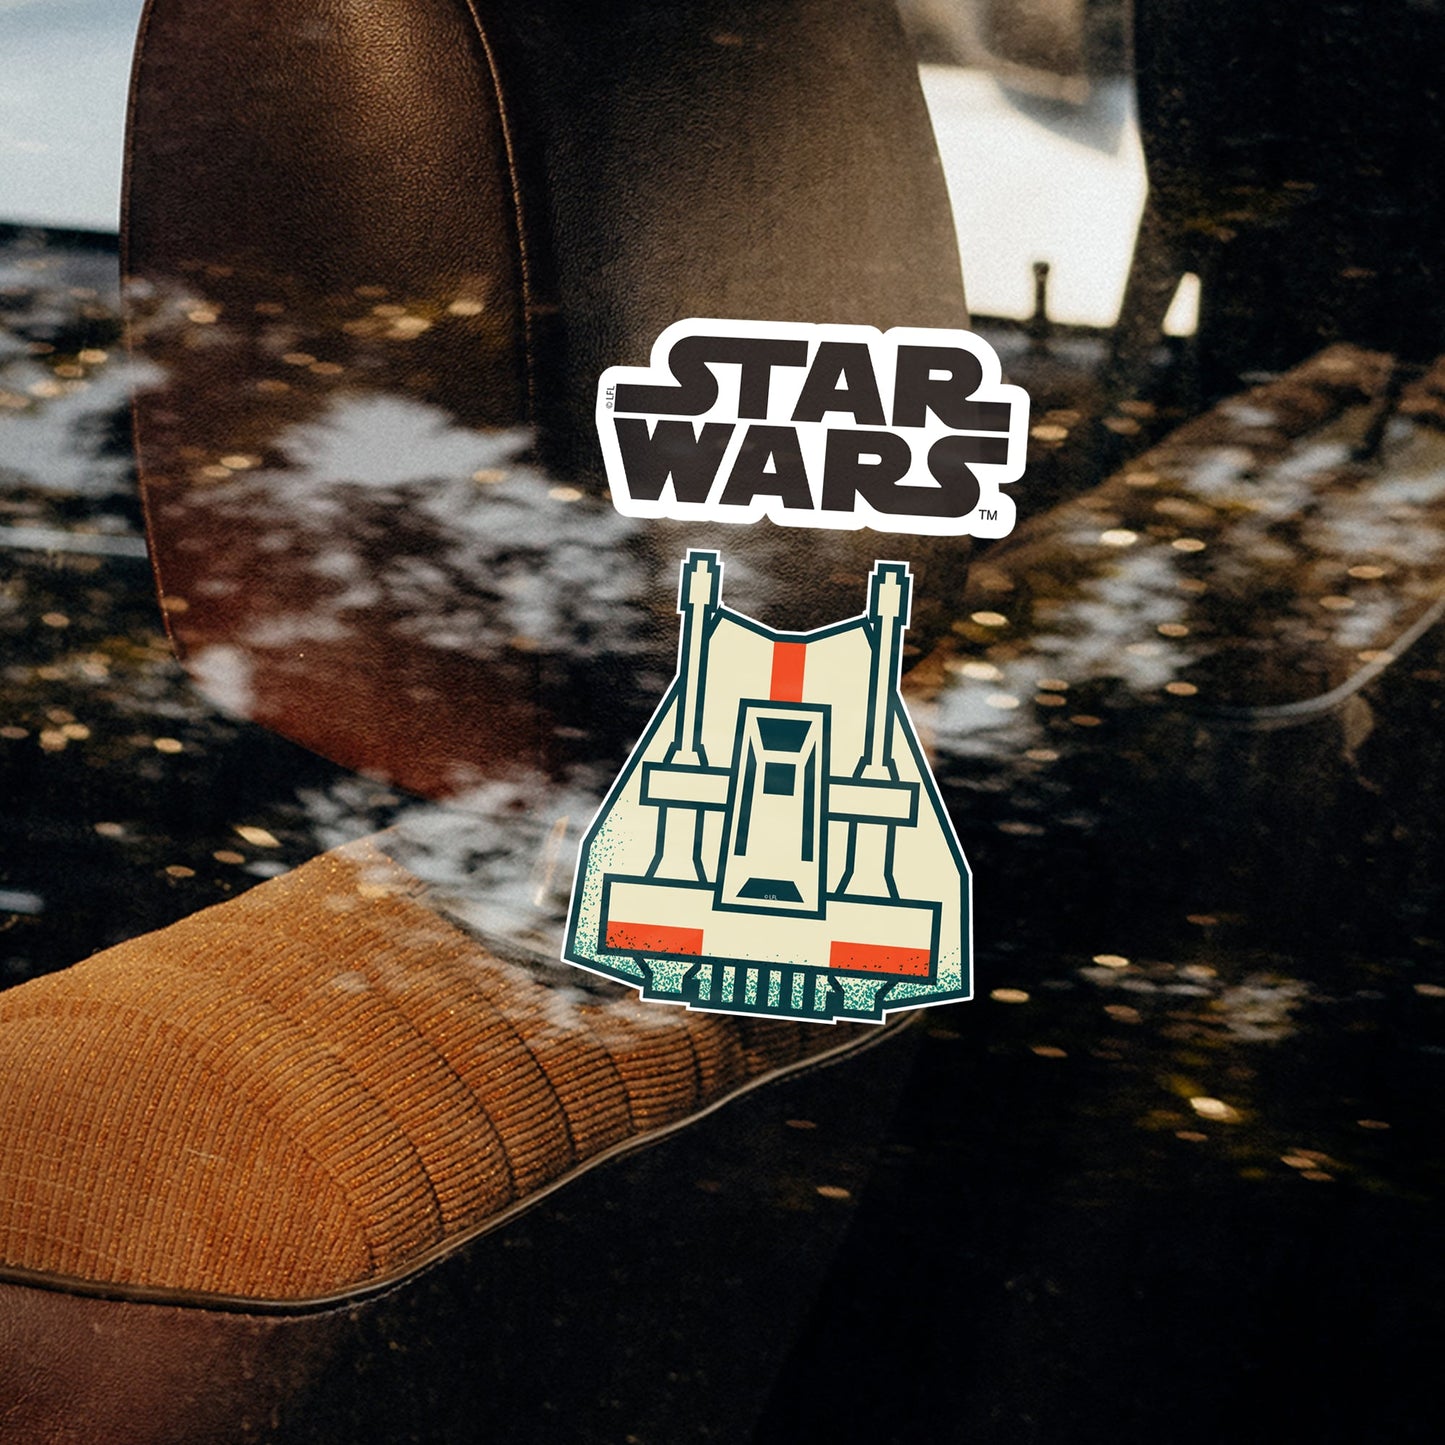 Star Wars: T 47 Snowspeeder Window Clings - Officially Licensed Disney Removable Window Static Decal